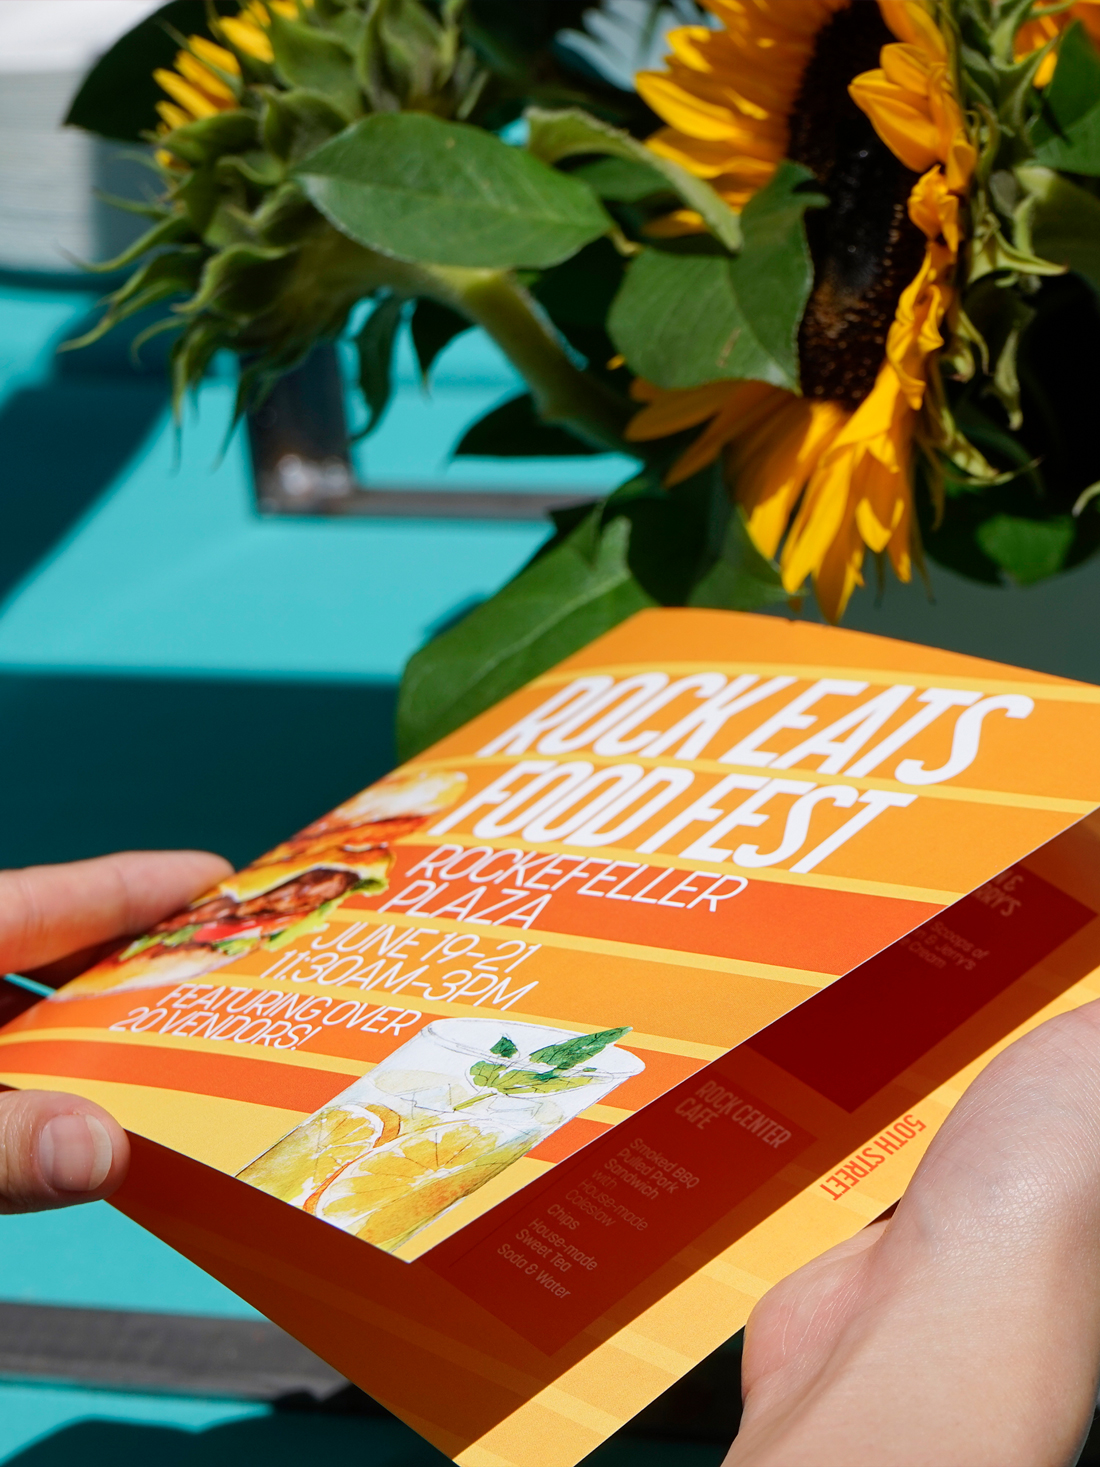 Print collateral for Fall Rock Eats Food Fest